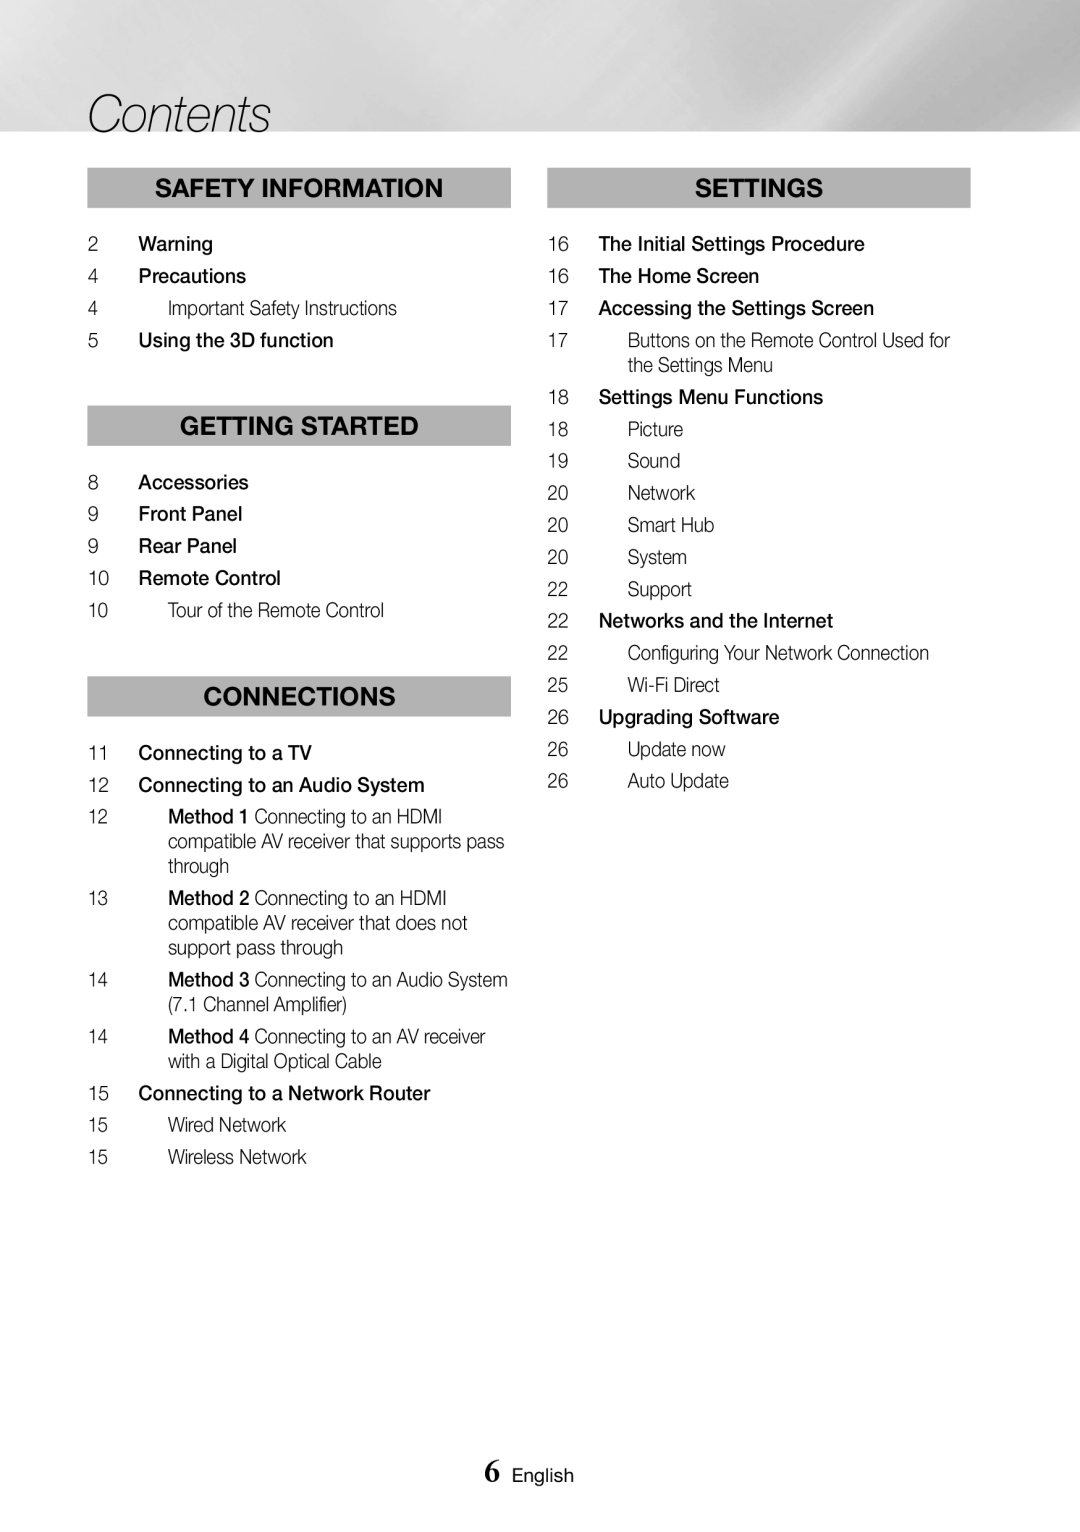 Samsung BD-J7500/EN manual Contents, Safety Information, Getting Started, Connections, Settings 